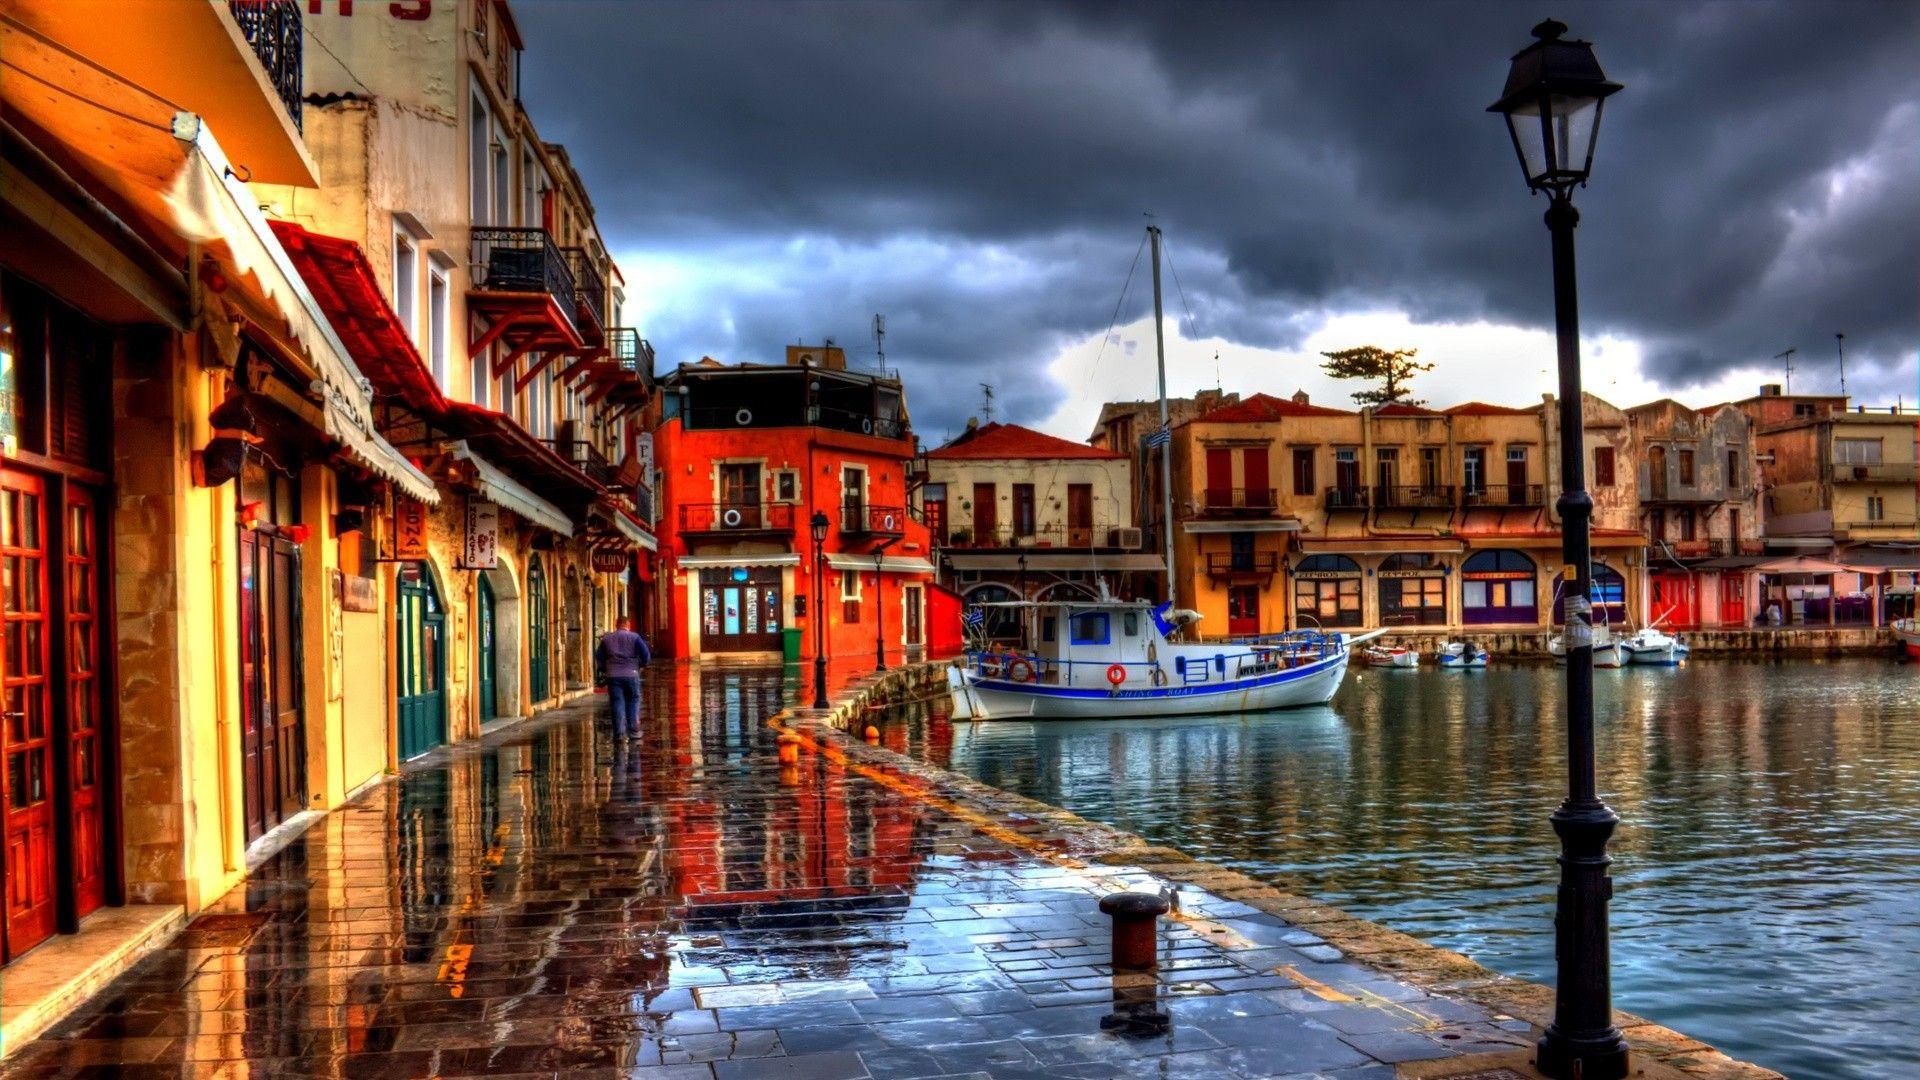 Rain harbor town views Wallpaper, Beach Picture and image